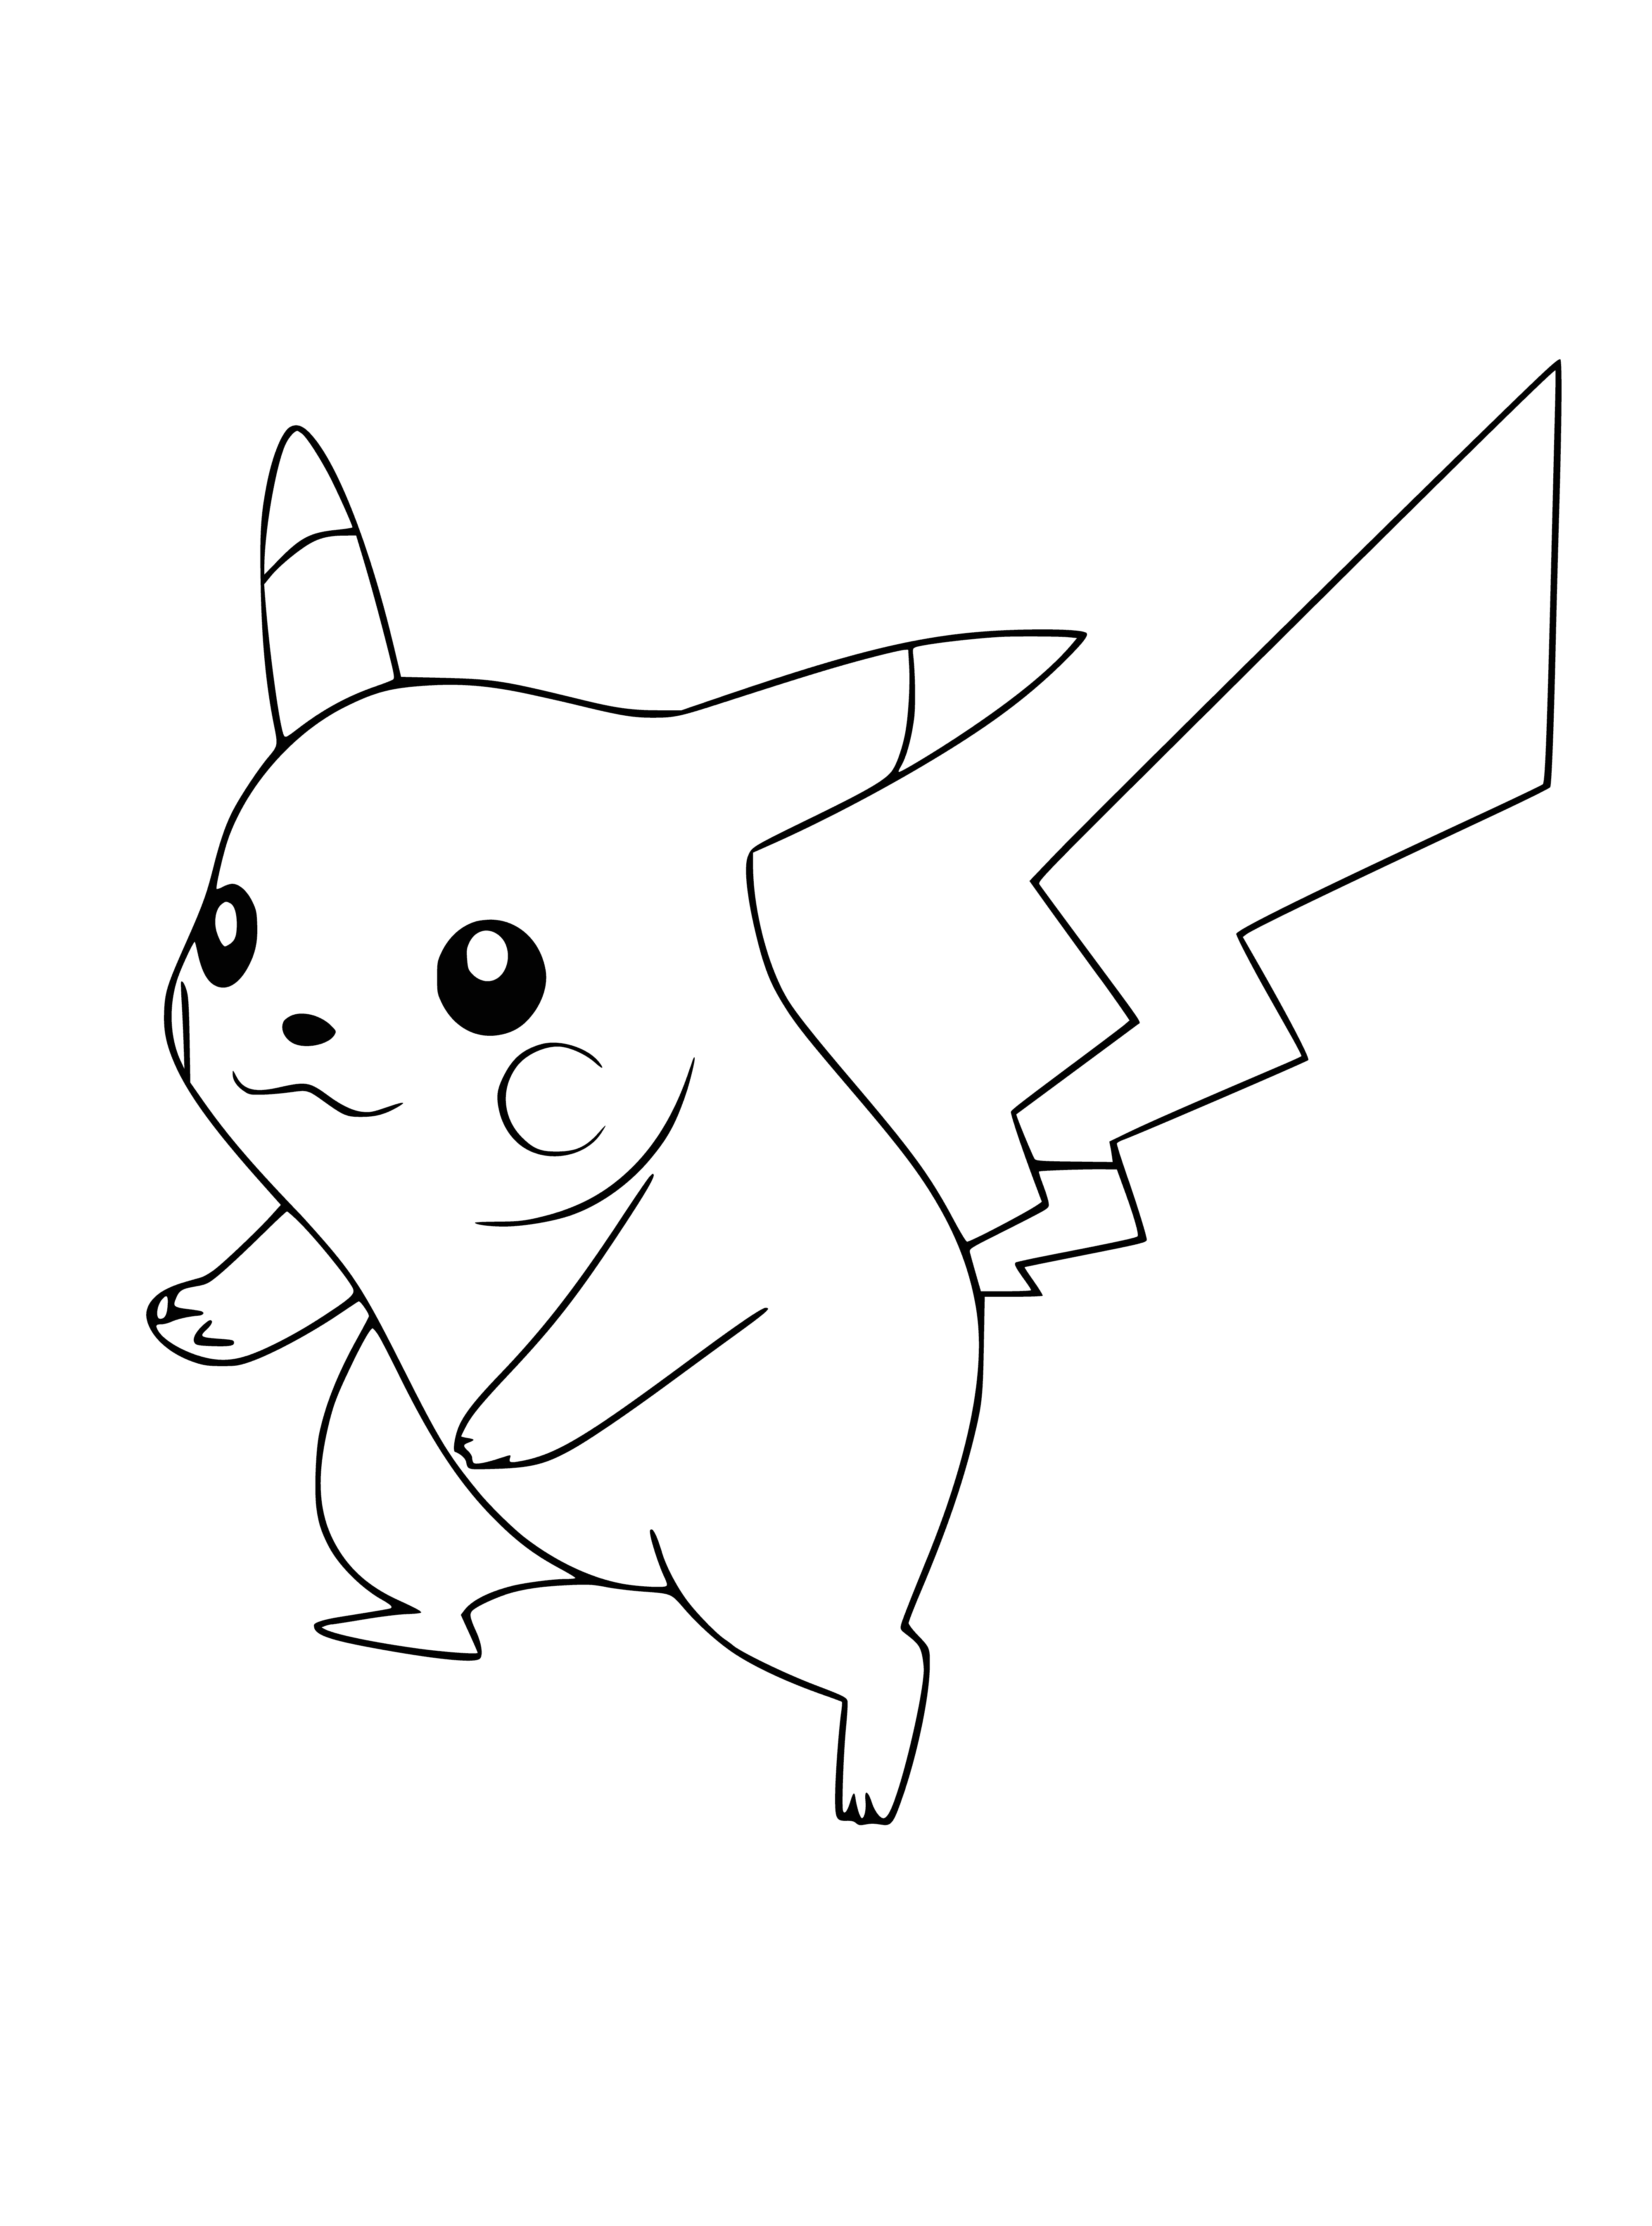 coloring page: Pikachu is a small, yellow Pokémon with black stripes, red spots and two red cheeks storing electricity used to shock opponents.